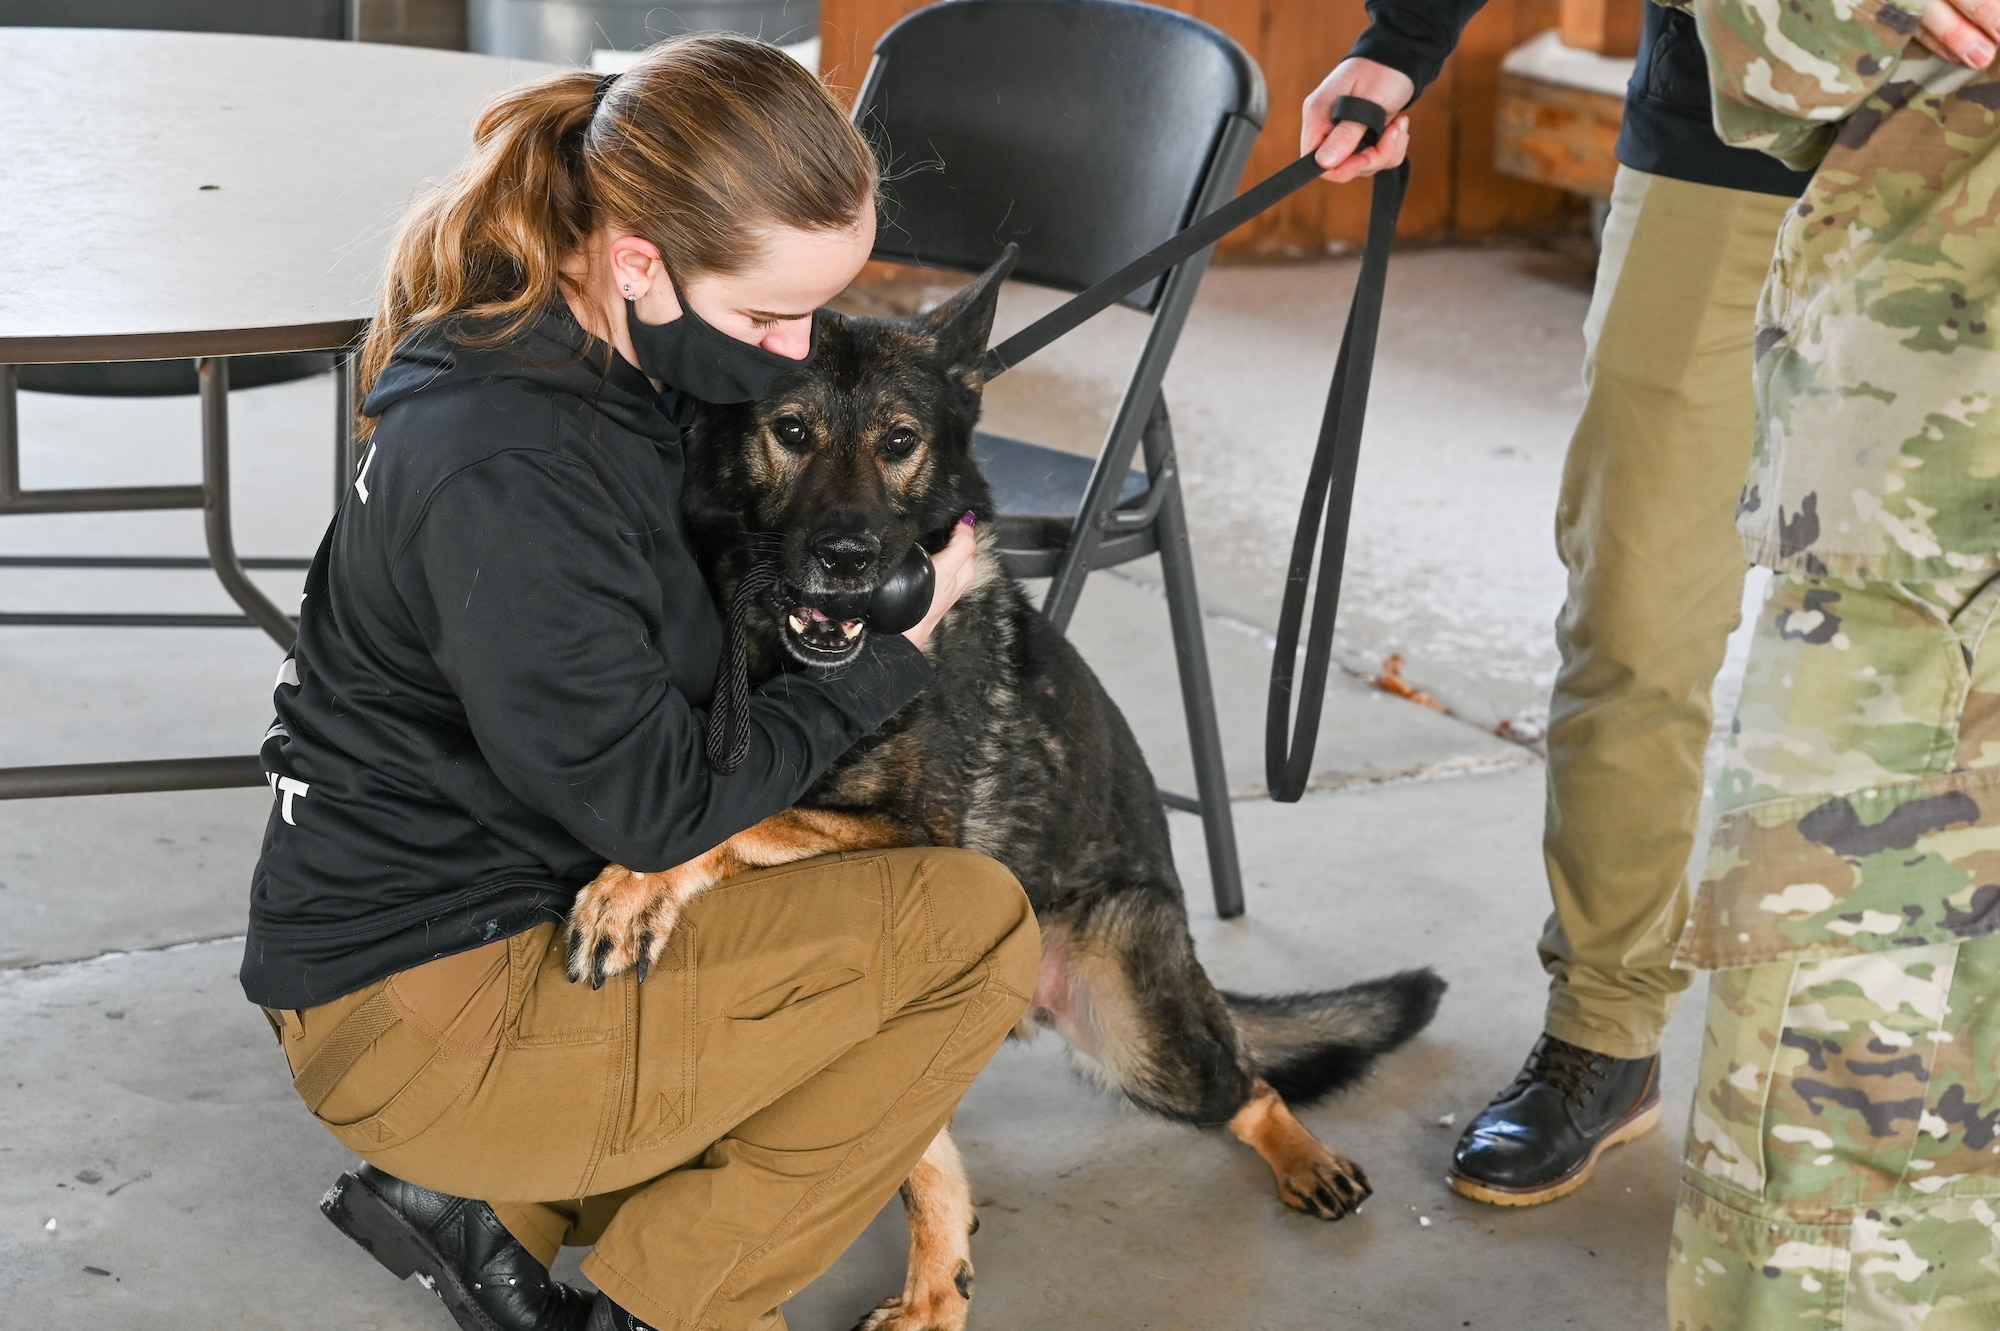 Staff Sgt. Michelle Schrek, 75th Security Forces Squadron, hugs military working dog Jimo during his retirement celebration Dec. 10, 2021, at Hill Air Force Base, Utah. MWD Jimo retired honorably after serving six years with the 75th SFS at Hill. (U.S. Air Force photo by Cynthia Griggs)